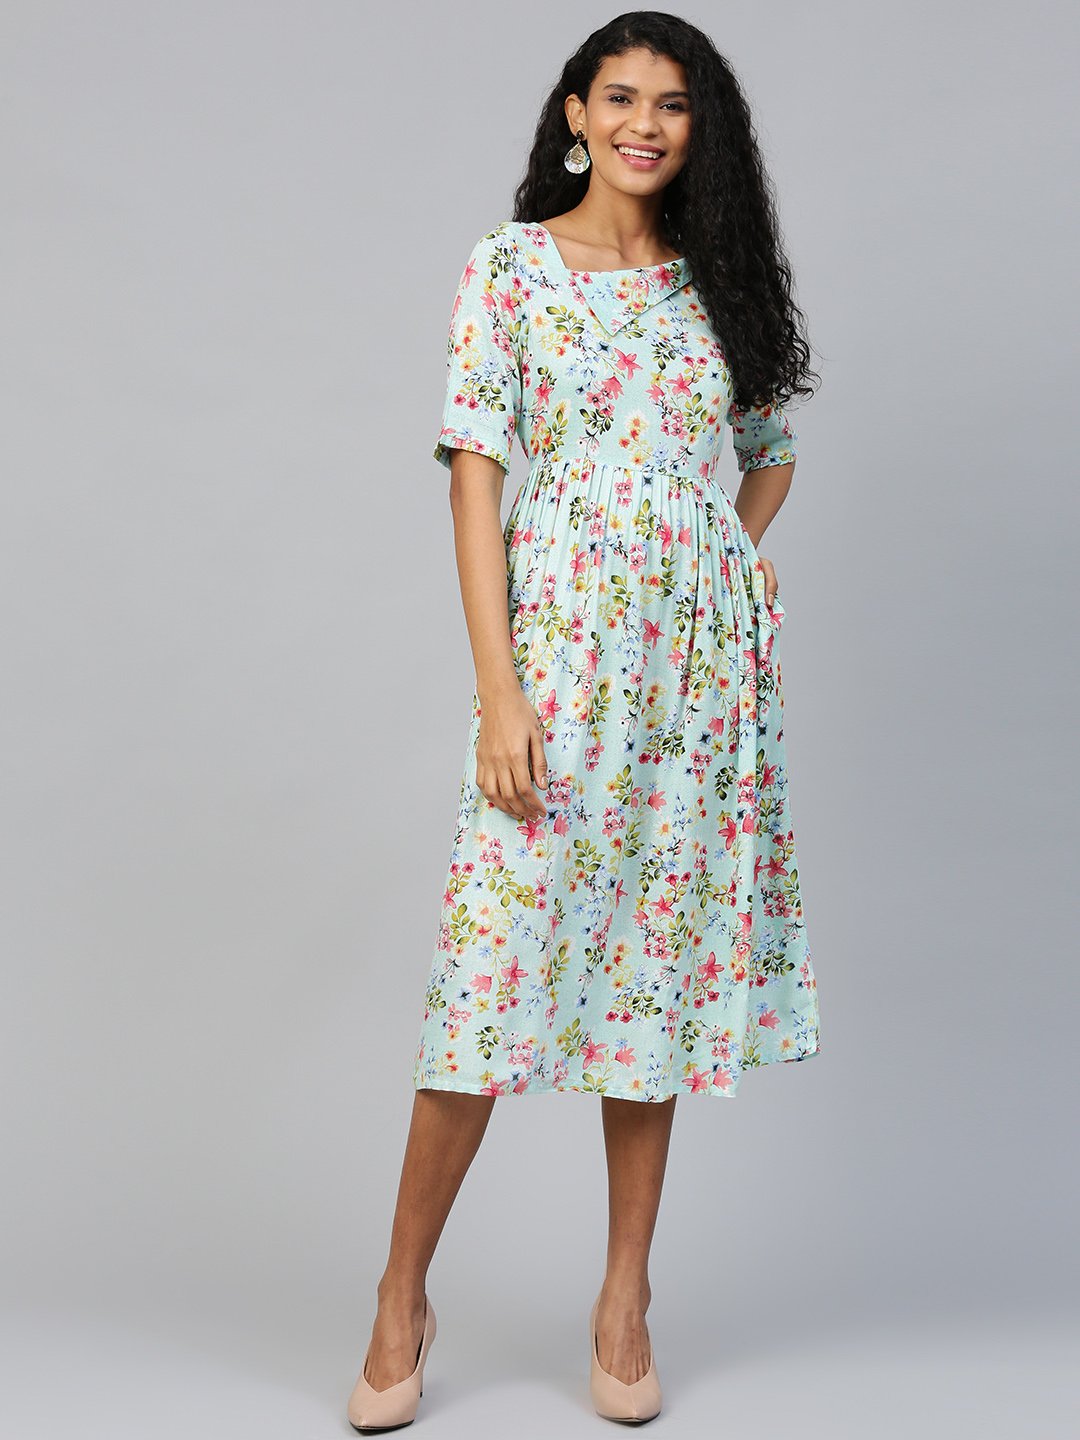 Women's Blue Floral Printed Square Neck Viscose Rayon Fit And Flare Dress - Nayo Clothing